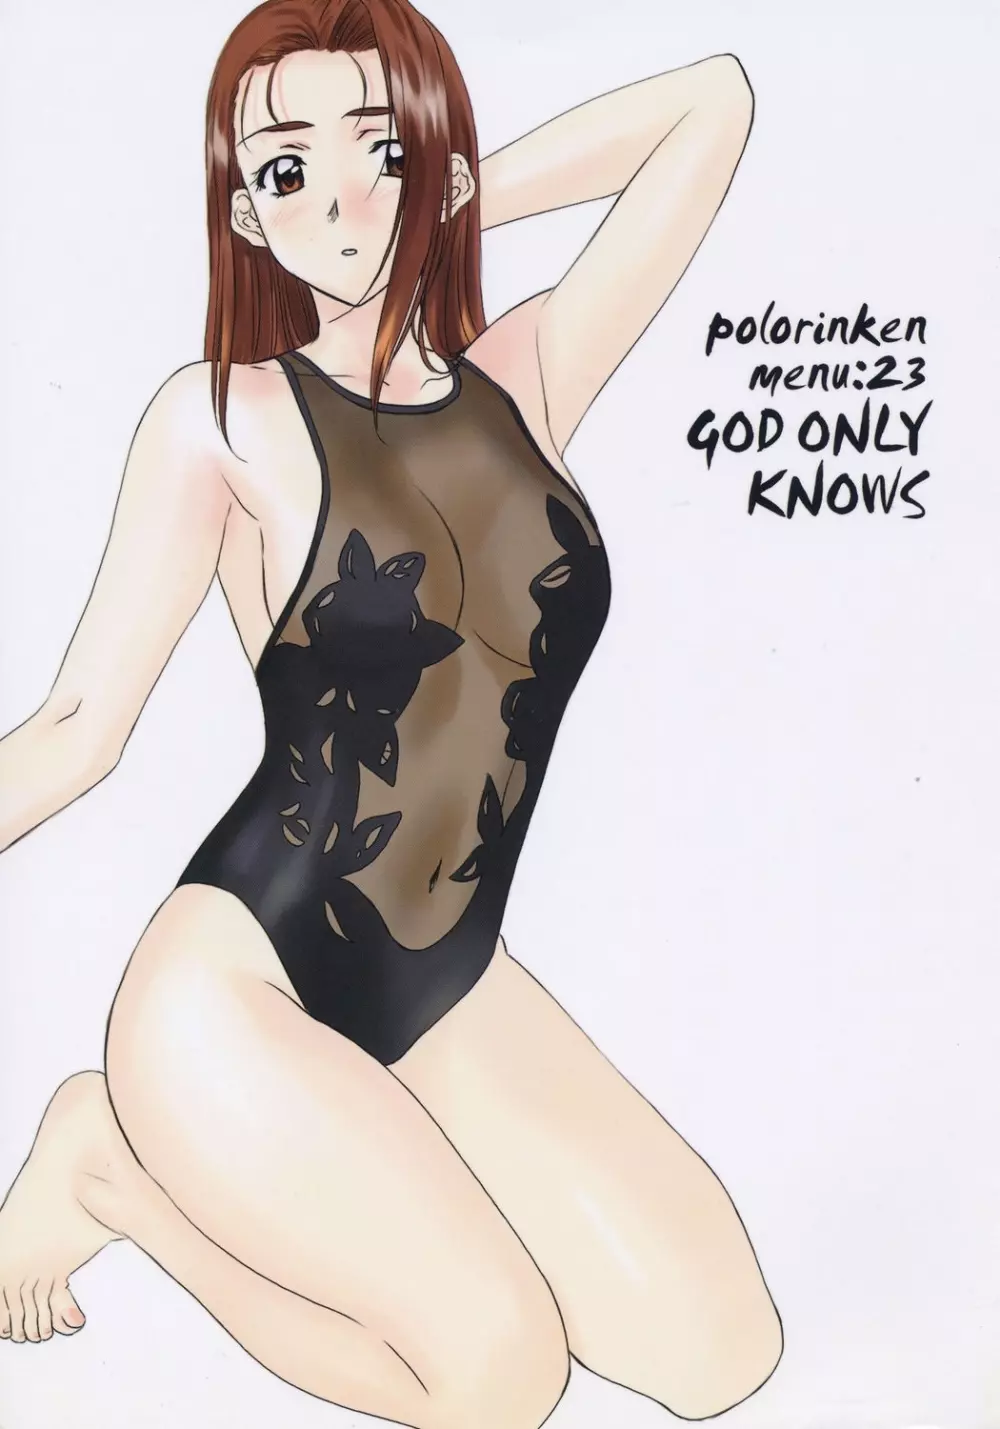 Menu 23 GOD ONLY KNOWS 1ページ